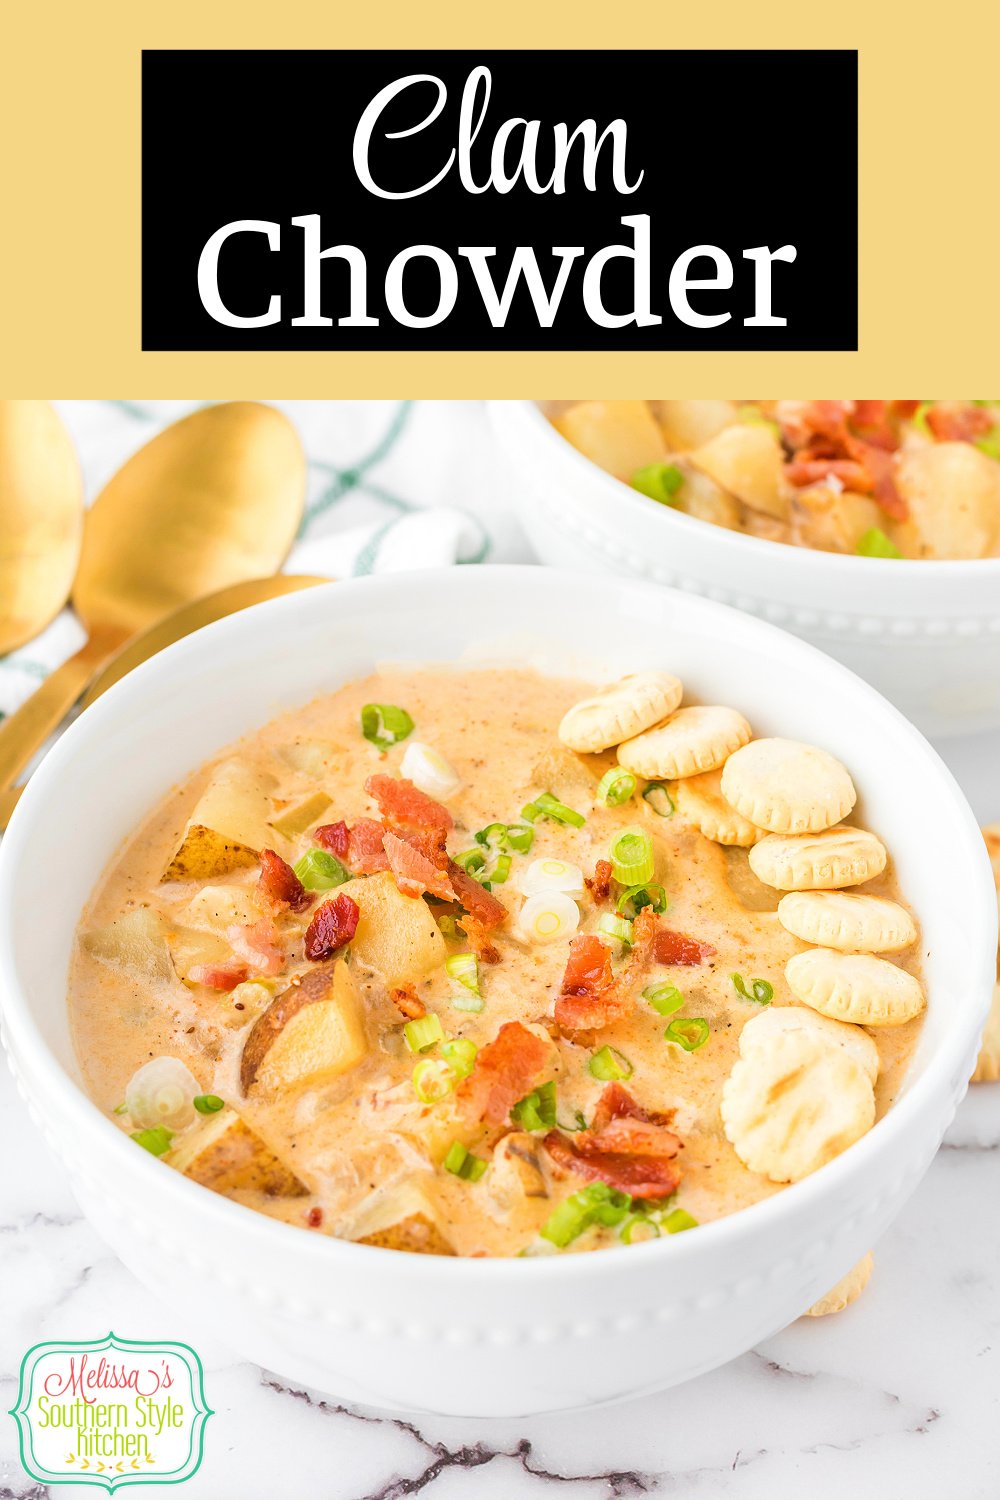 Treat the family to a steamy bowl of this creamy Southern style Clam Chowder at home #clamchowder #southernstyle #southernchowderrecipes #easyclamchowder #clamsrecipes #seafoodchowder #clamchowderrecipe